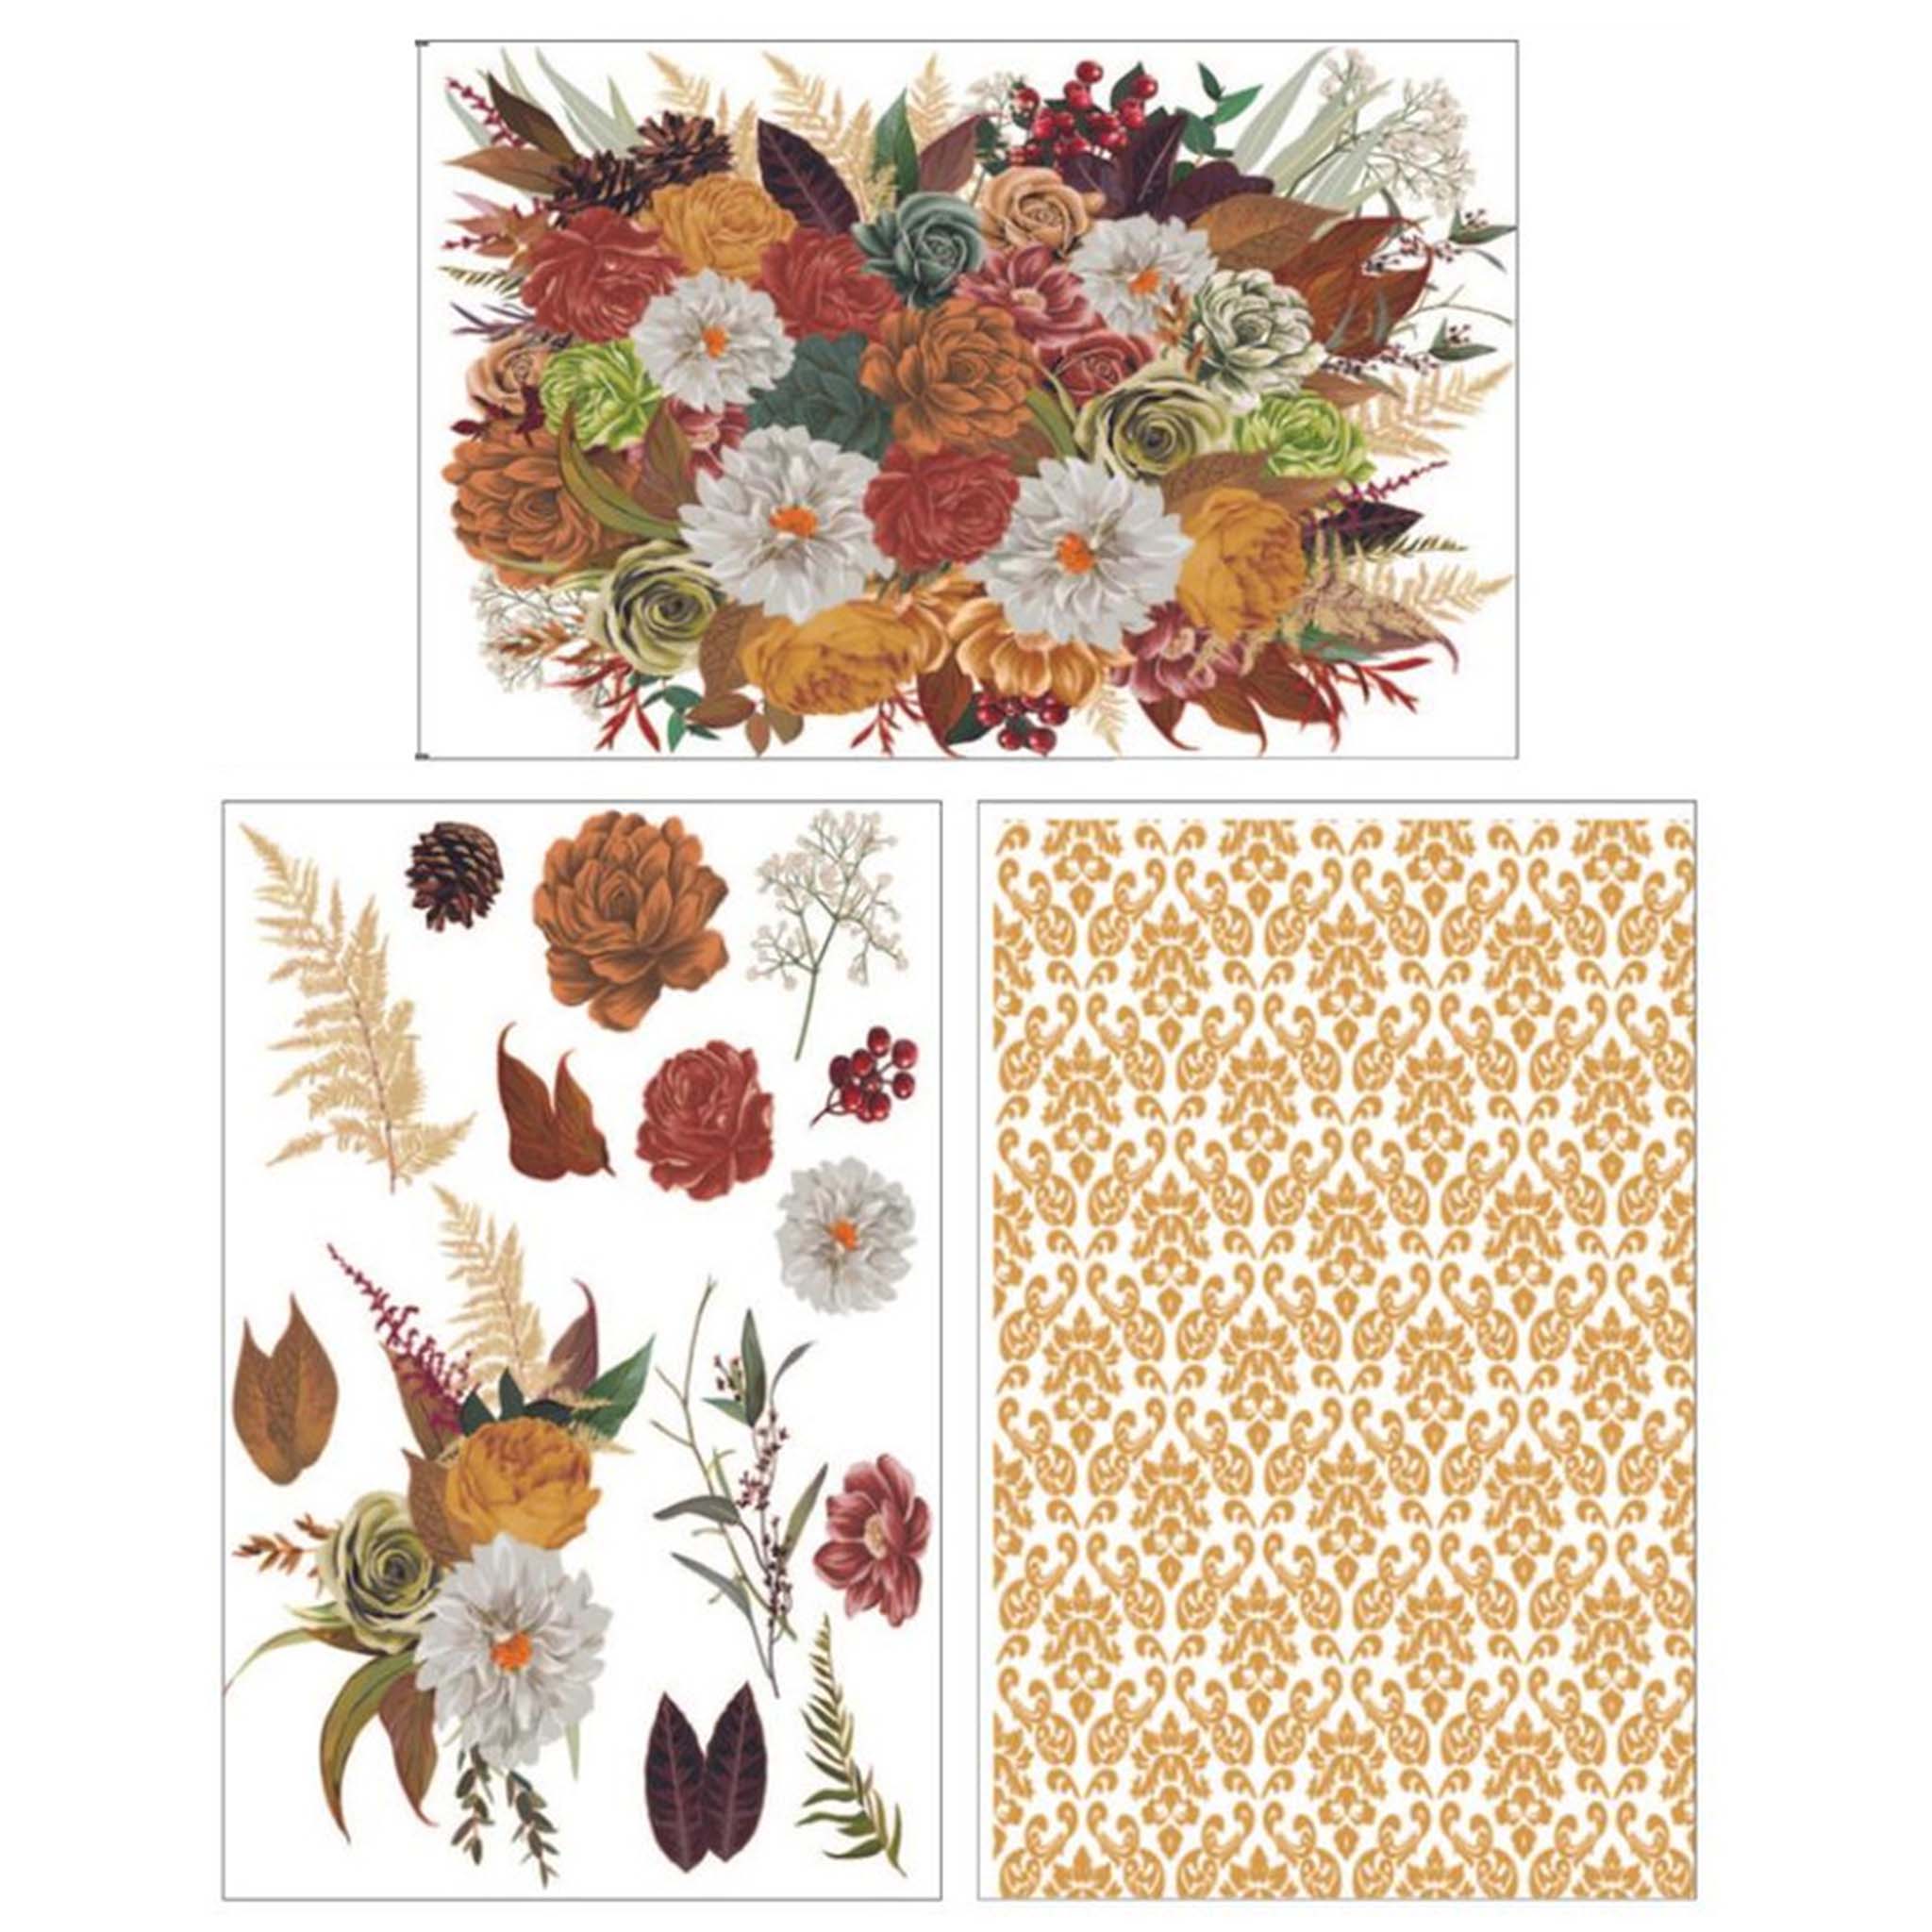 Three sheets of small rub-on transfers against a white background feature a stunning golden brocade pattern on one sheet, as well as earthy shades of large floral arrangements and individual flowers on the others sheets.